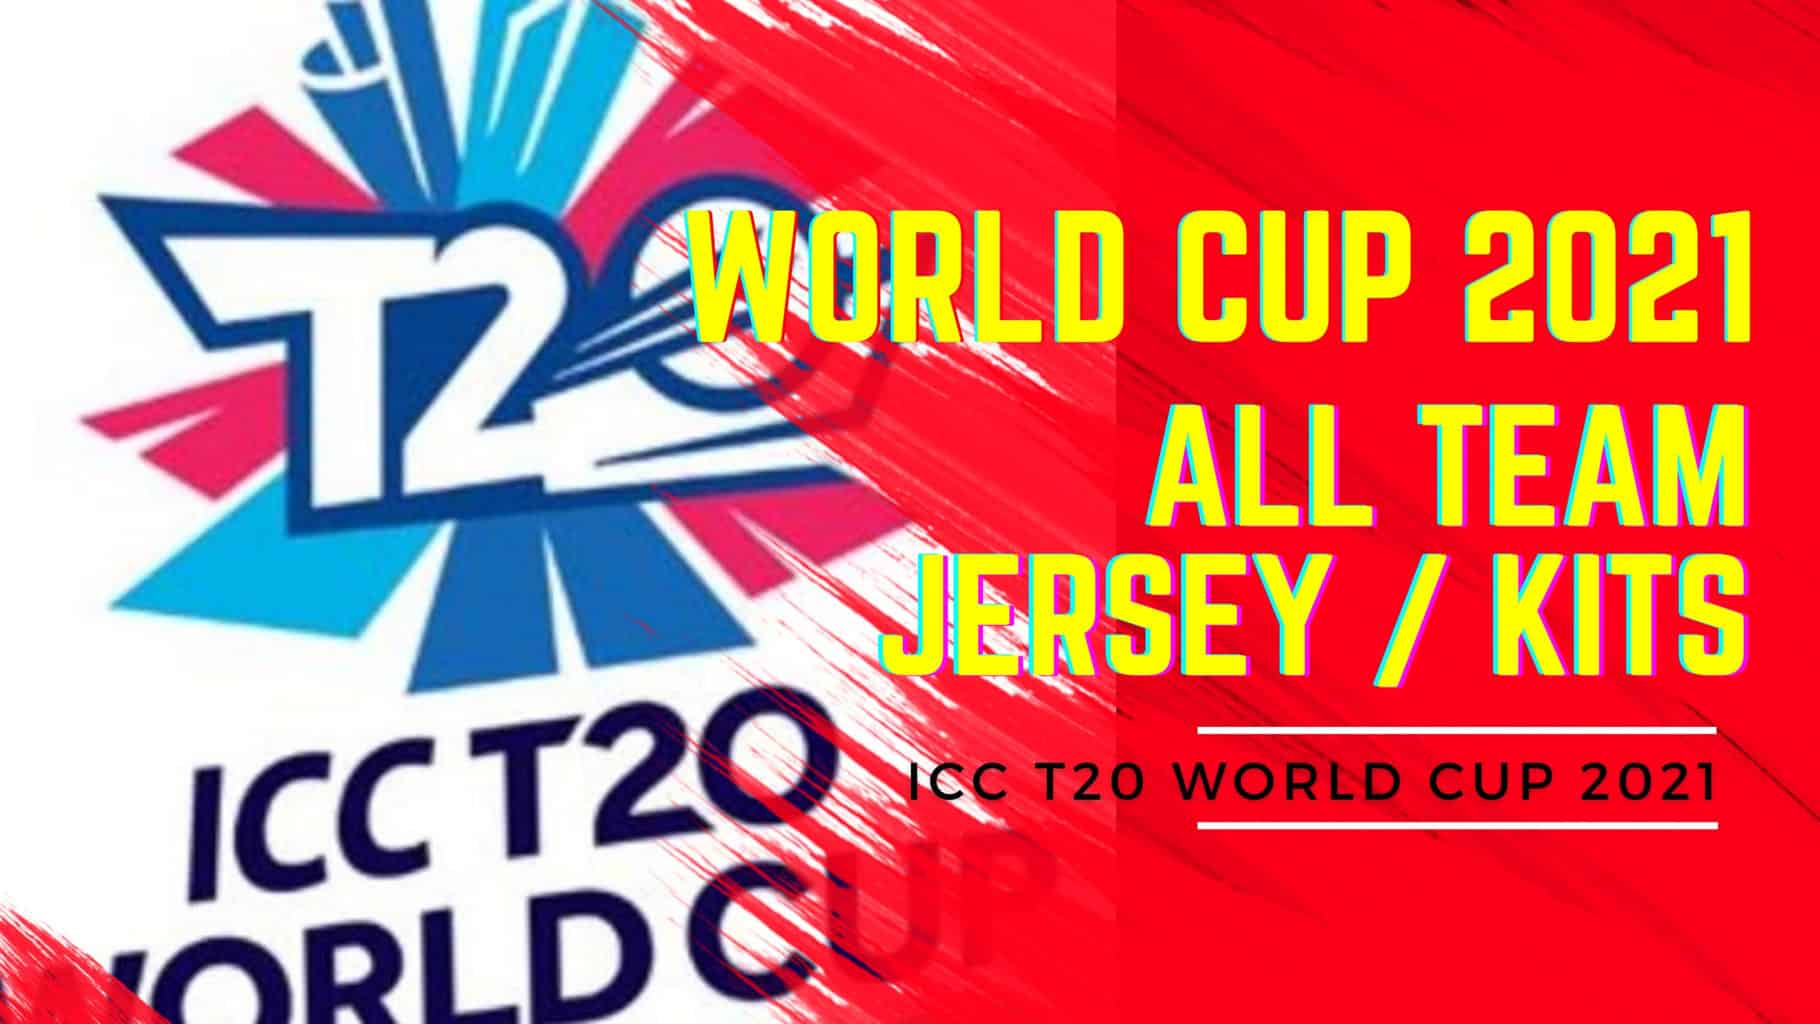 t20 world cup 2021 jersey/kits